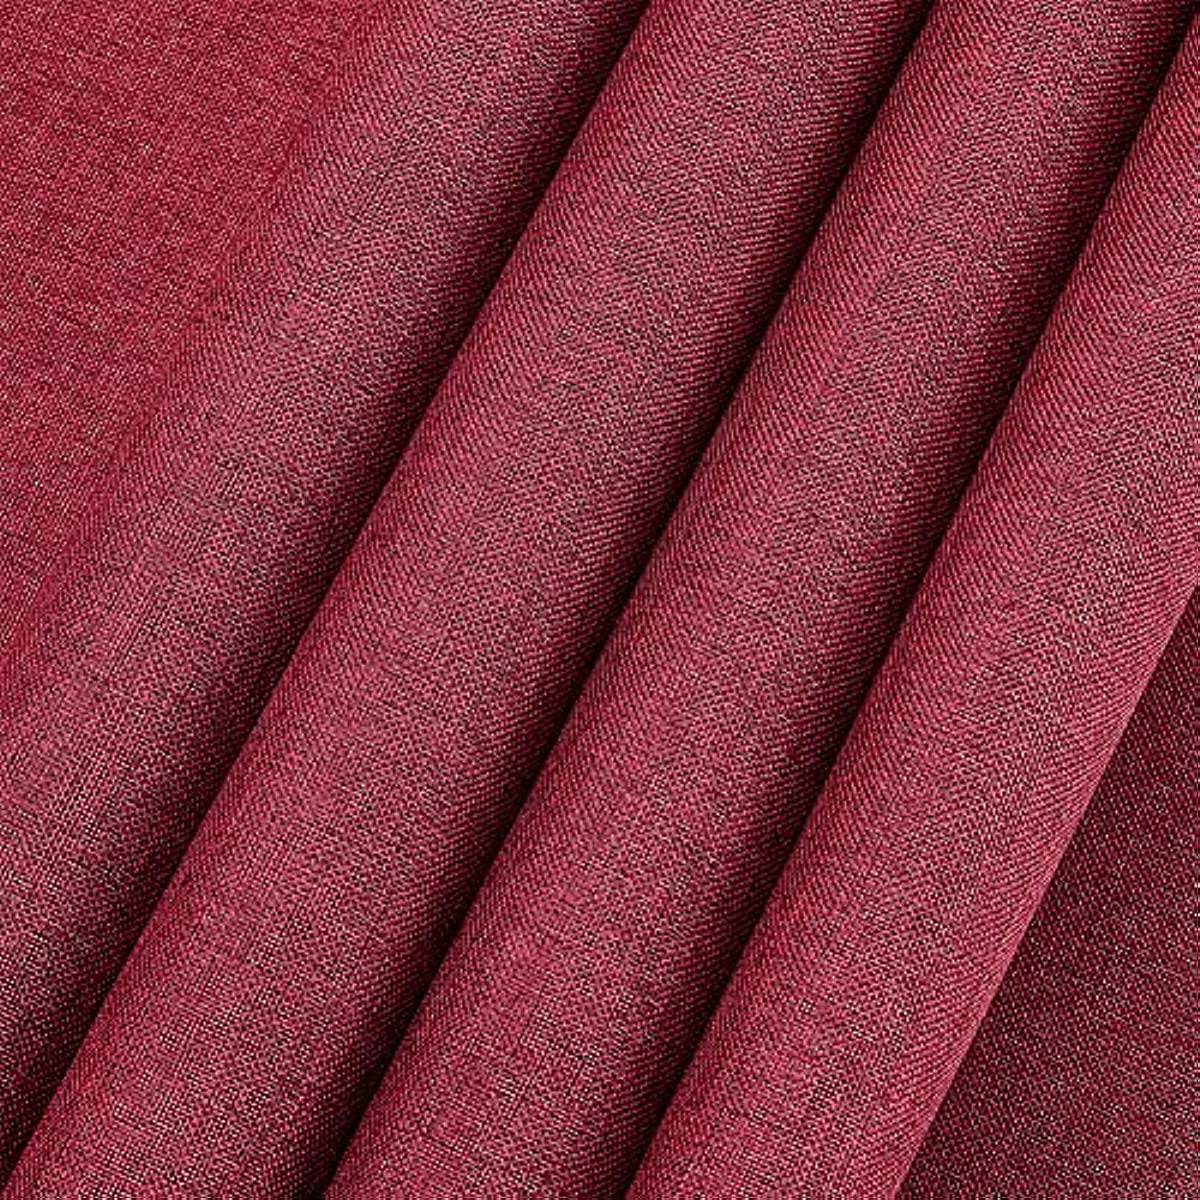 39.4x16.9 Inch Dark Red Book Binding Cloth Bookcover Fabric Surface with  Paper Backed Book Cloth Close-Weave Book Cloth for Book Binding  Scrapbooking DIY Crafts 